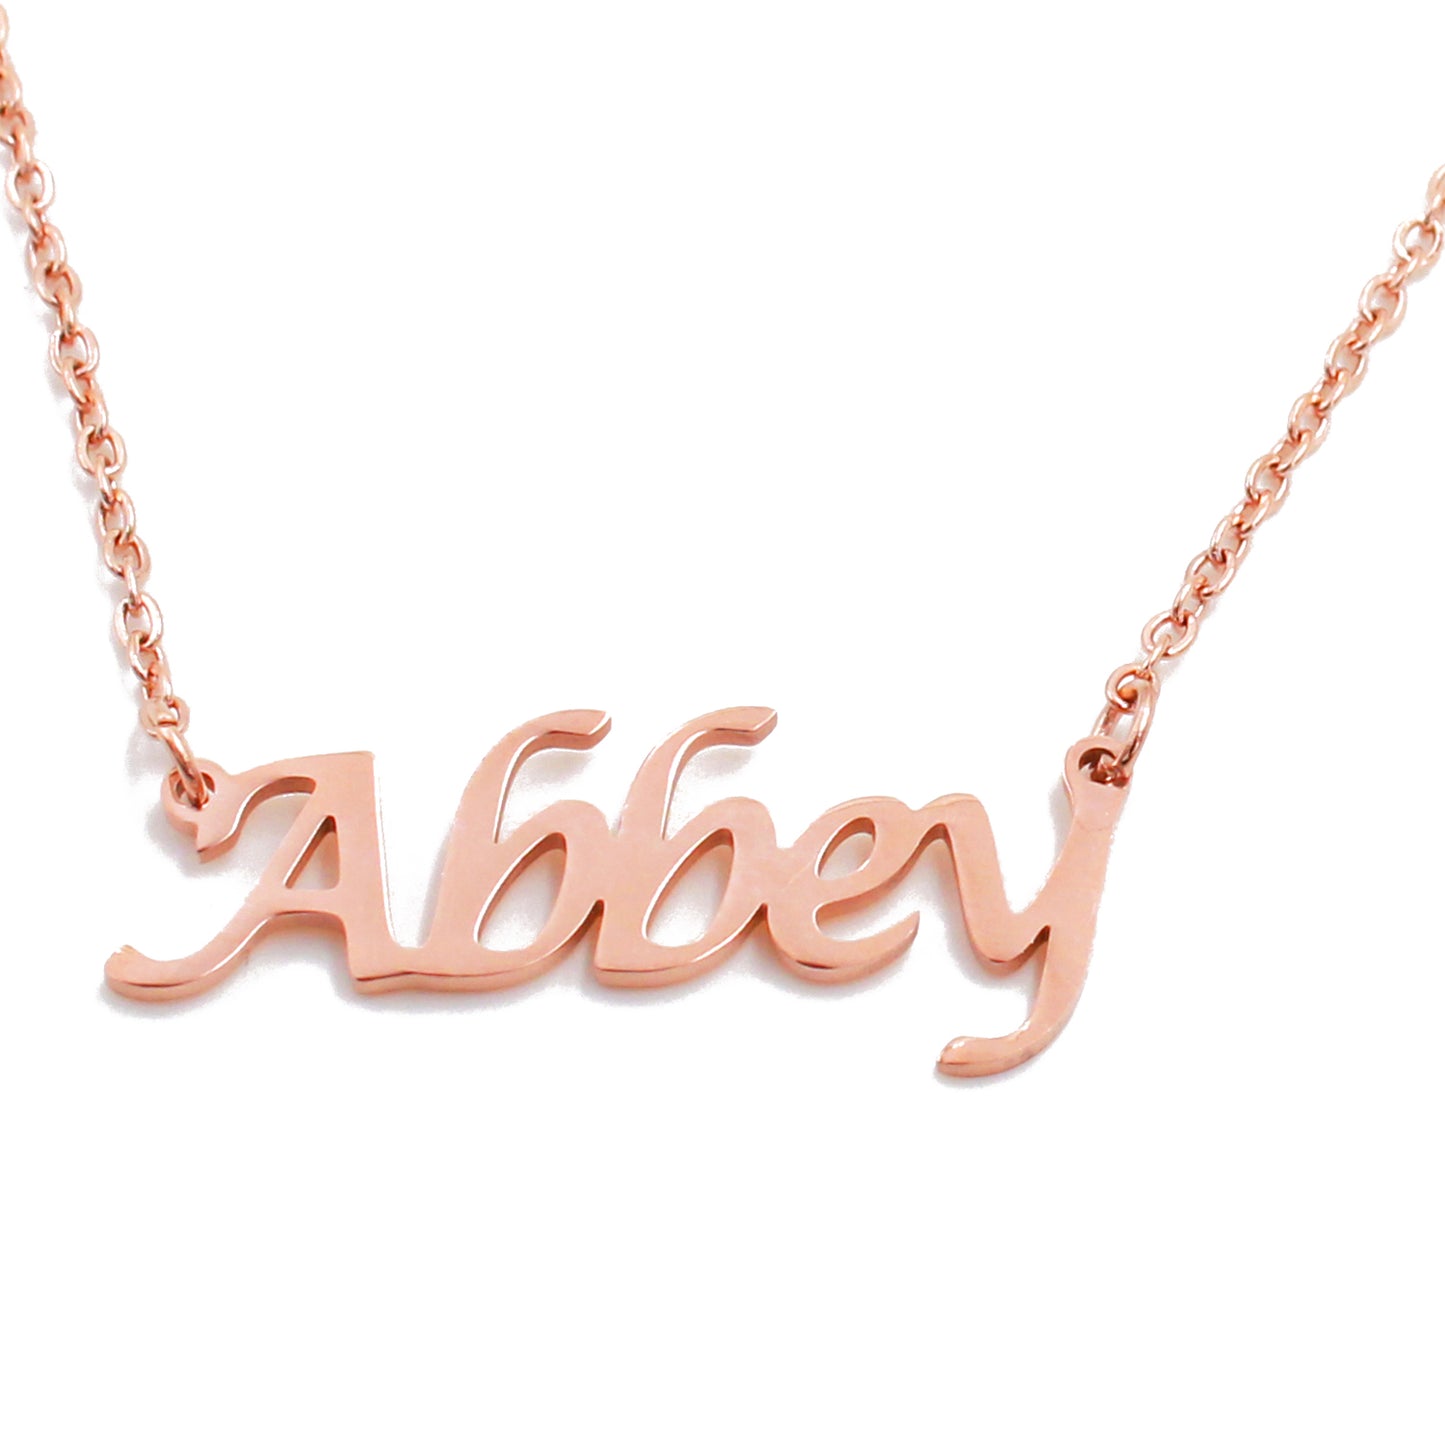 Abbey Name Necklace